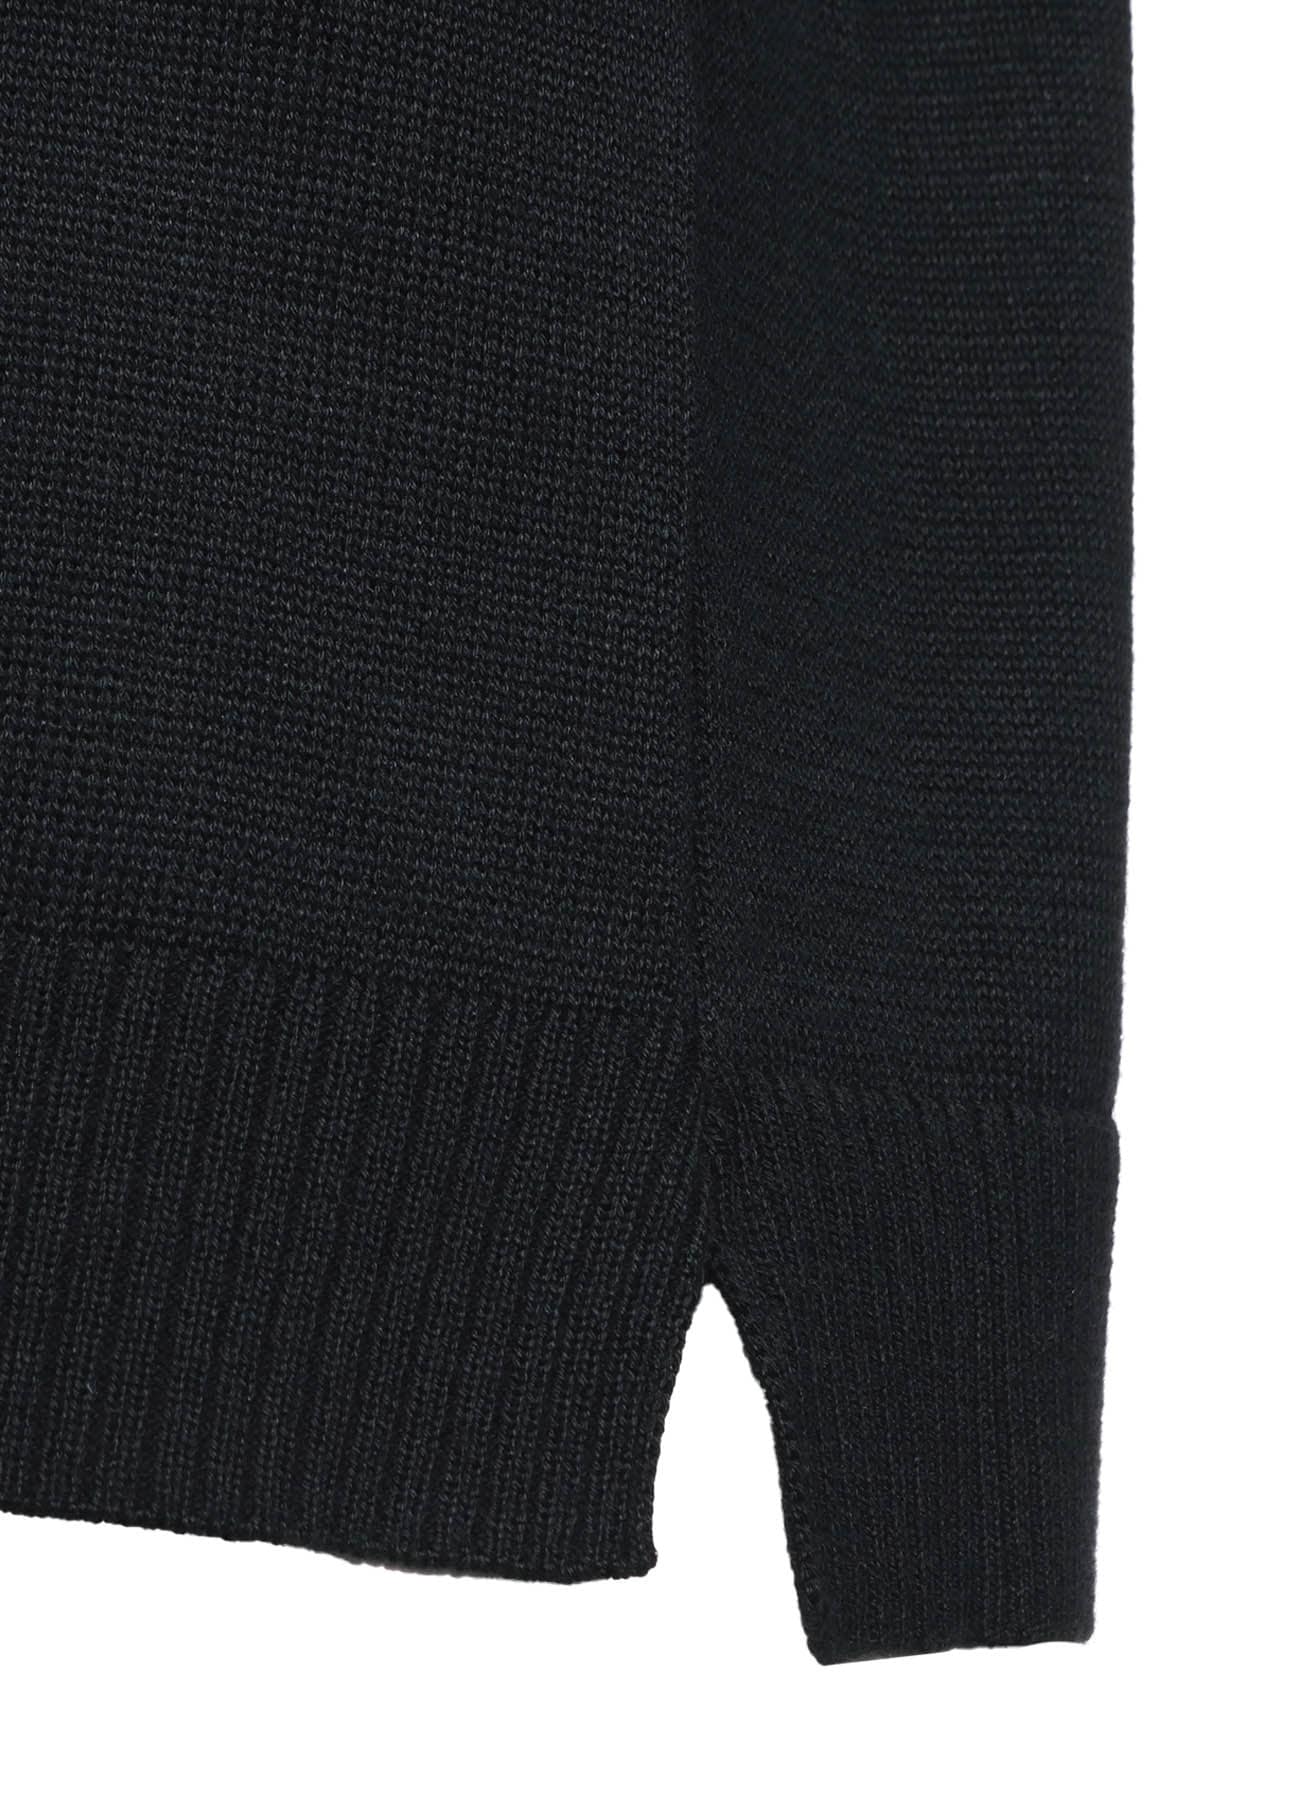 BLENDED YARN PULLOVER KNIT WITH KNIT WITH OUTSEAM DESIGN(M Black 